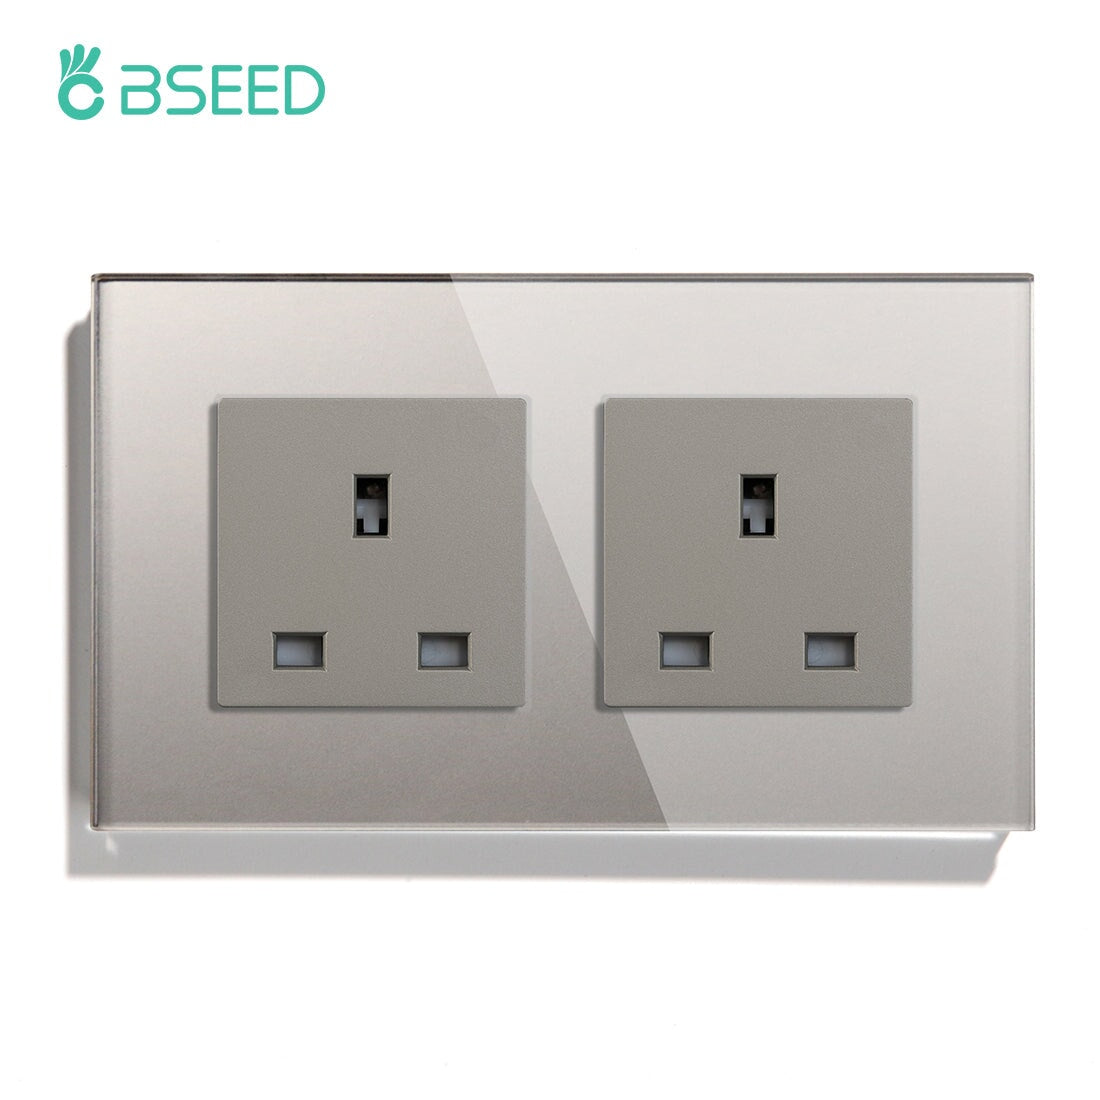 BSEED UK Wall Sockets Single Power Outlets Kids Protection 16A Power Outlets & Sockets Bseedswitch grey Double 